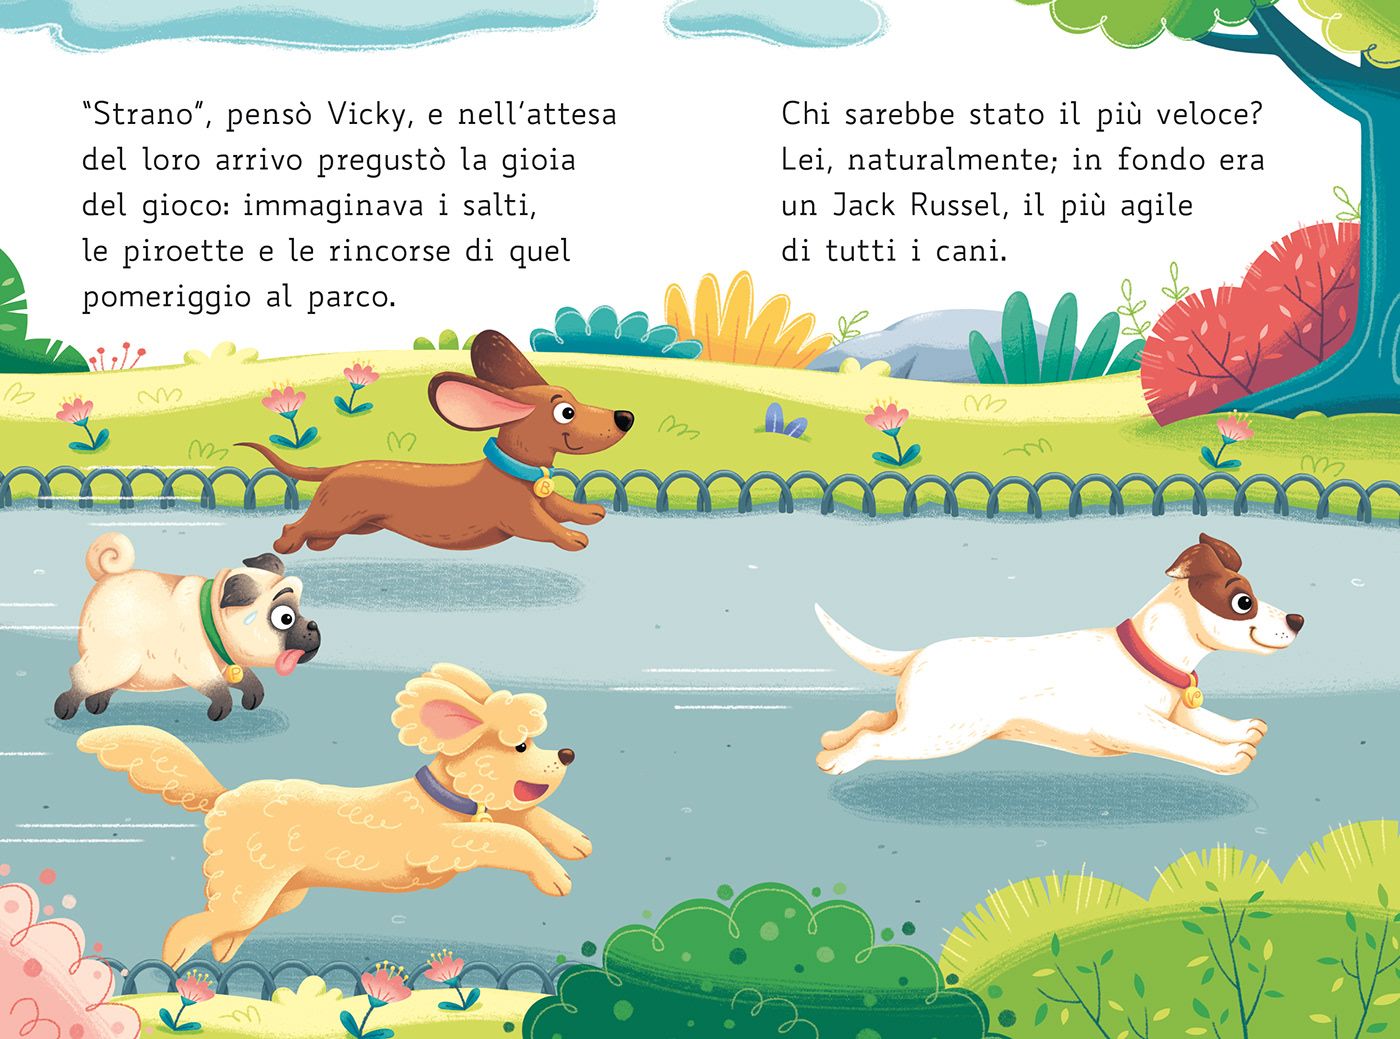 dog Pug dachshund Poodle children's book children's illustration kidlitart kidlitillustration cani JackRussell